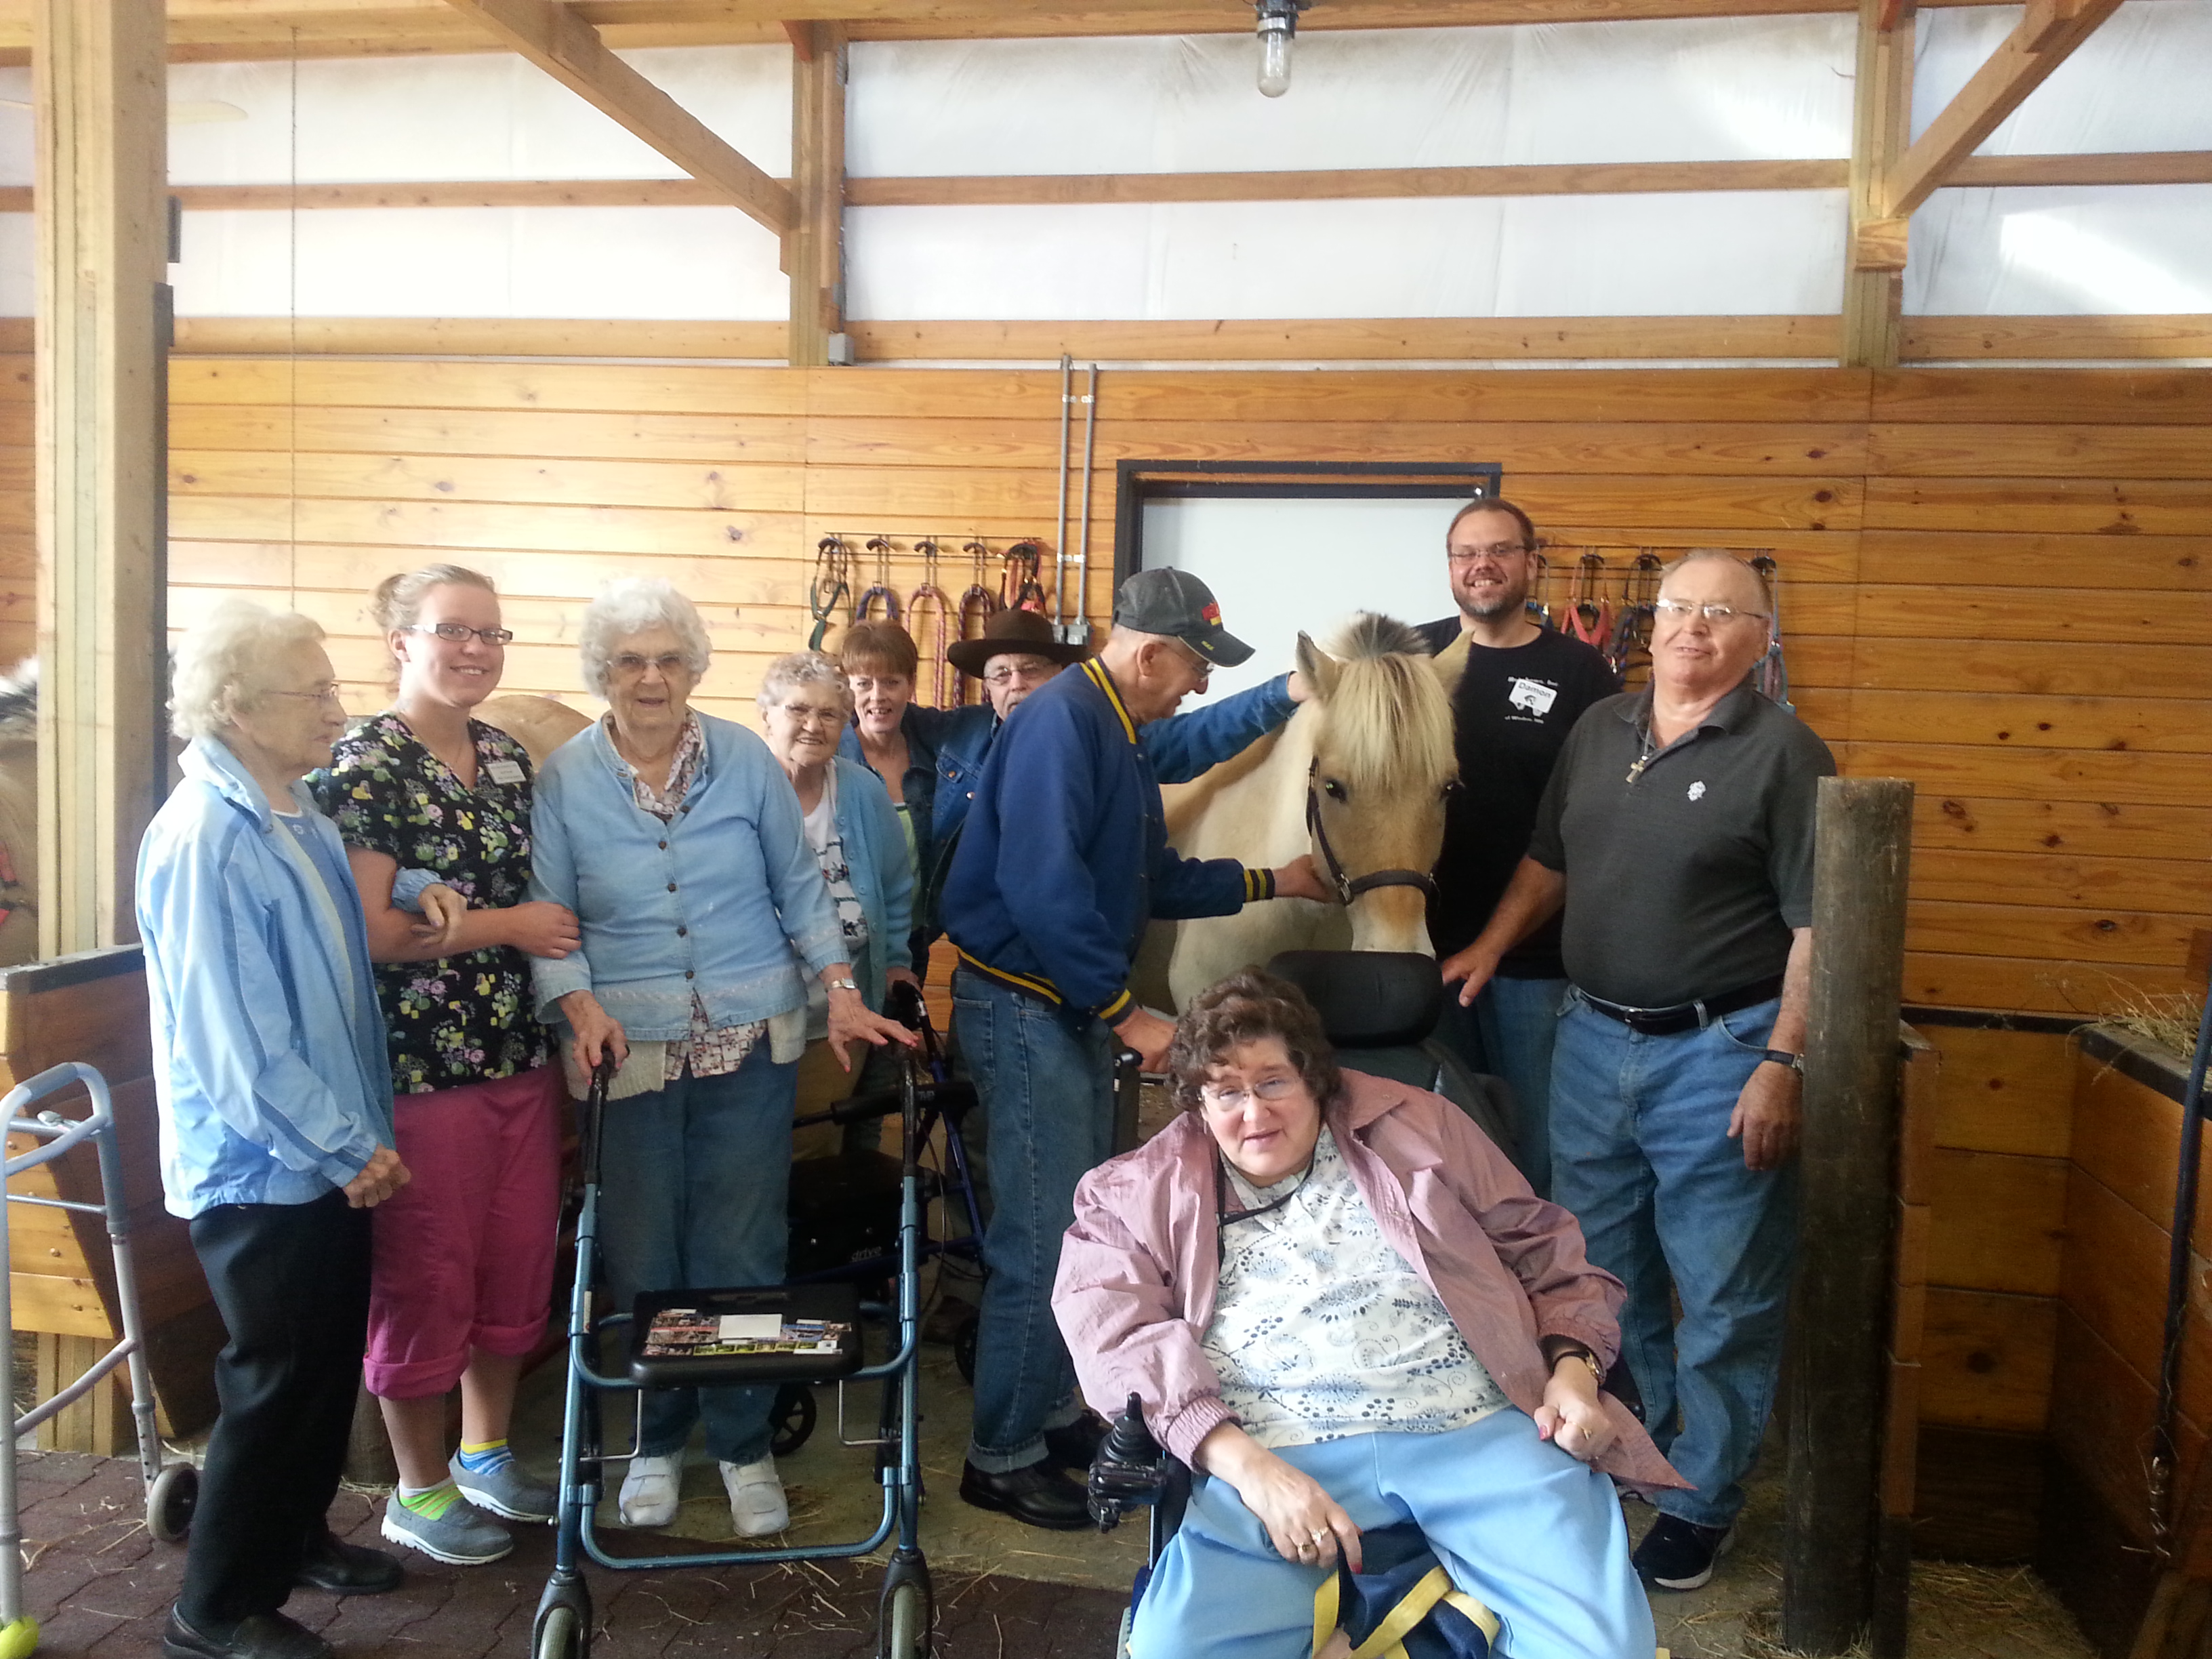 Horse outing at Lakeview Assisted Living